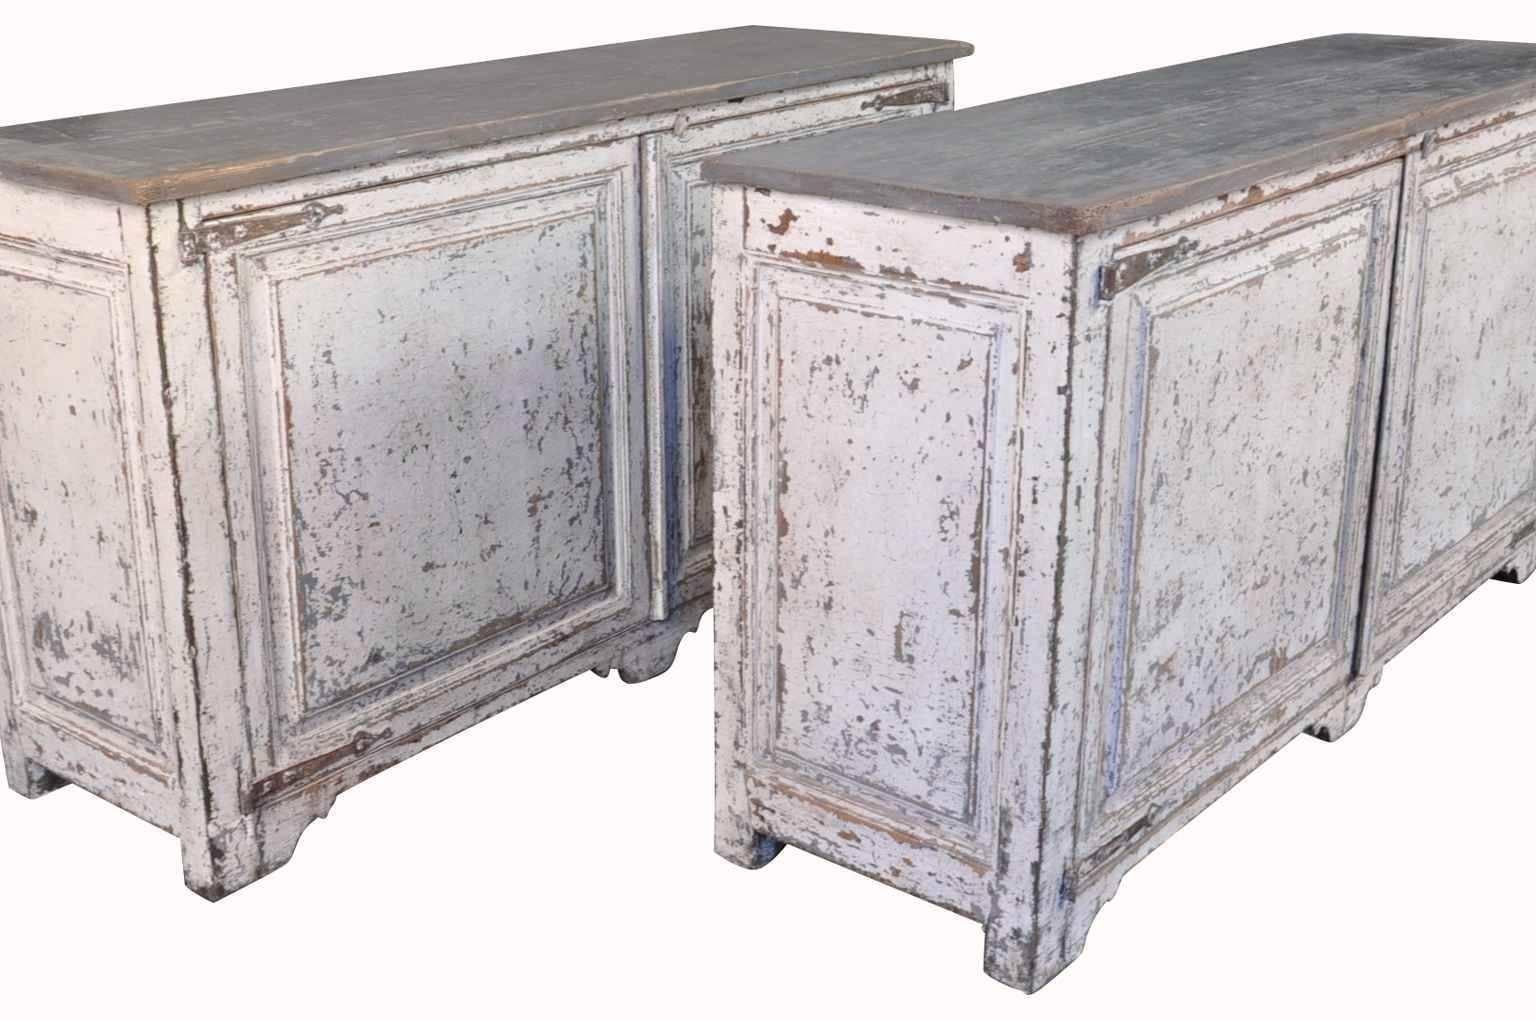 Pair of 19th century Primitive buffets from the Catalan region of Spain. Terrific painted finish and texture. Wonderful storage. These buffets may be sold as a pair or individually. The price for the piece is $8125.